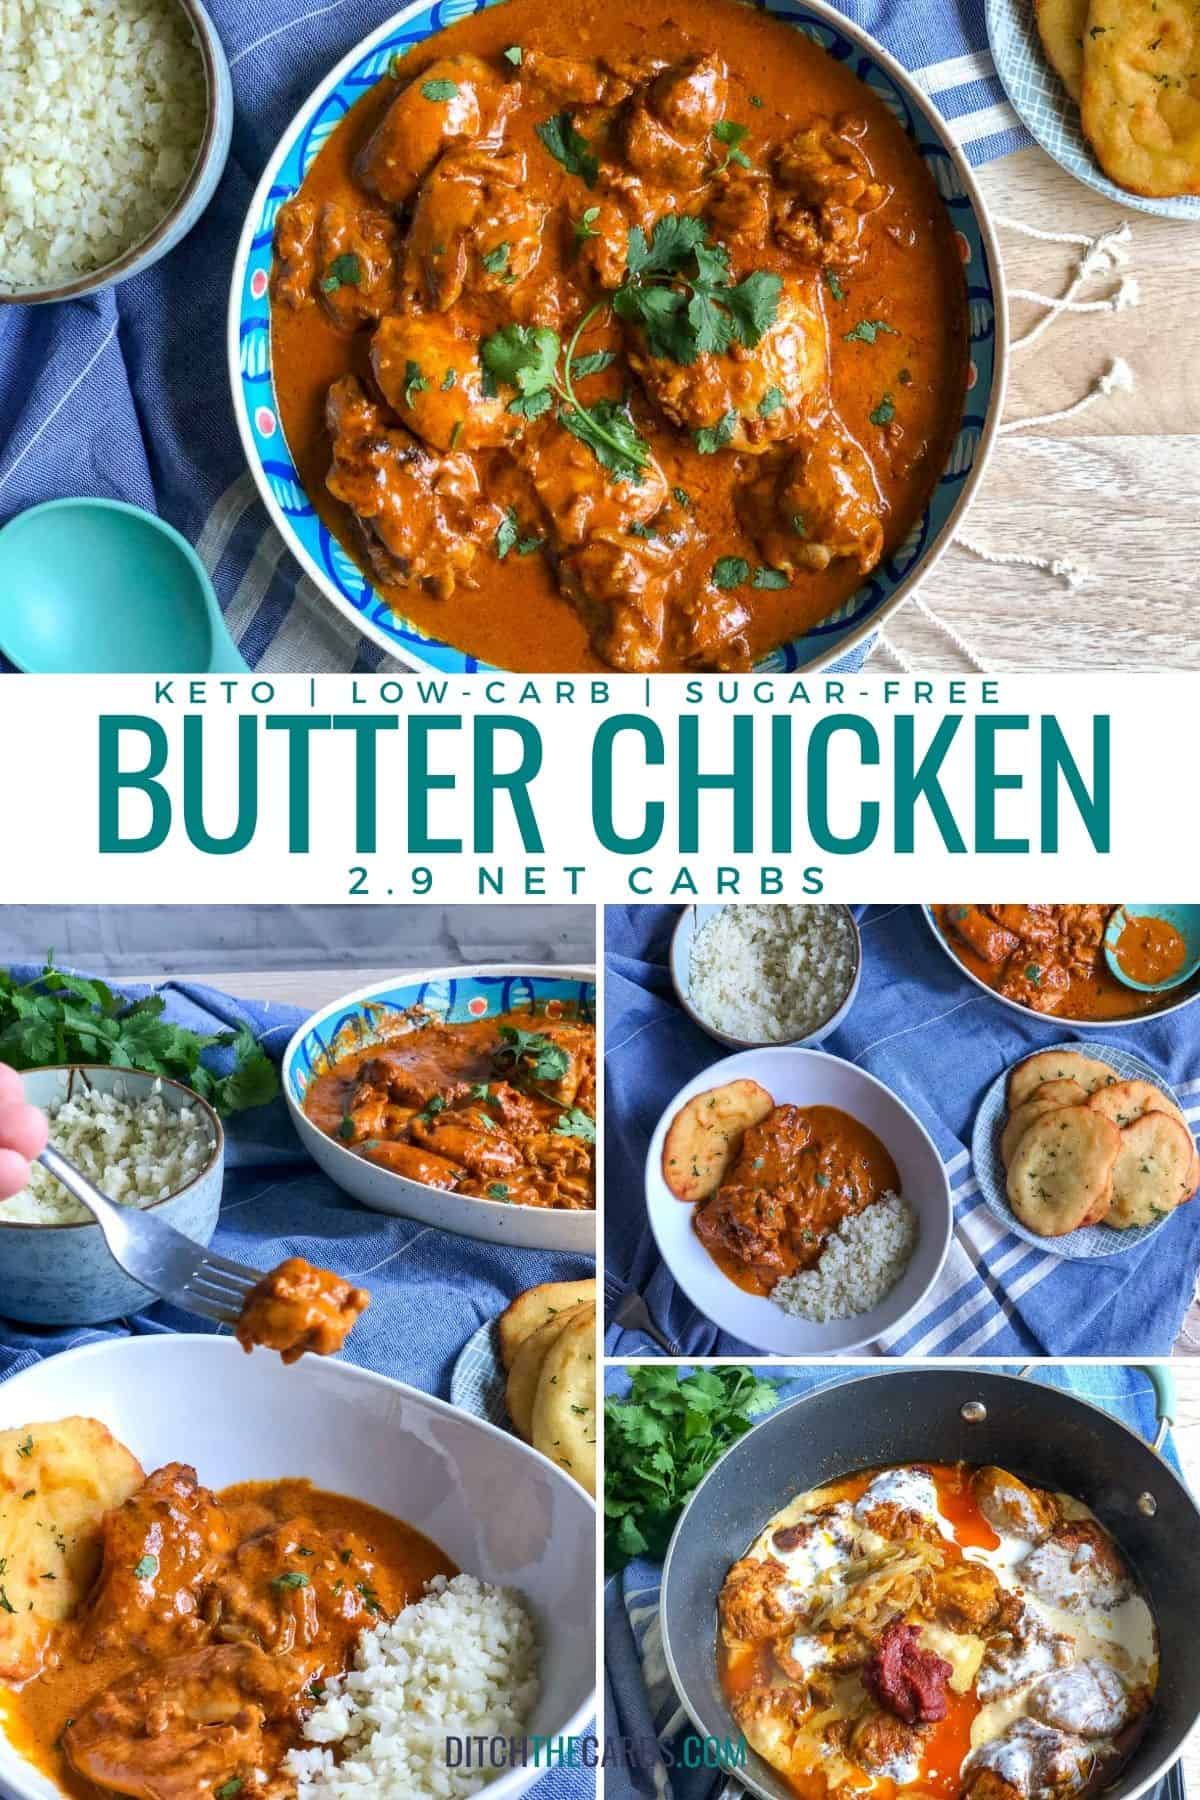 Collage of images showing keto butter chicken